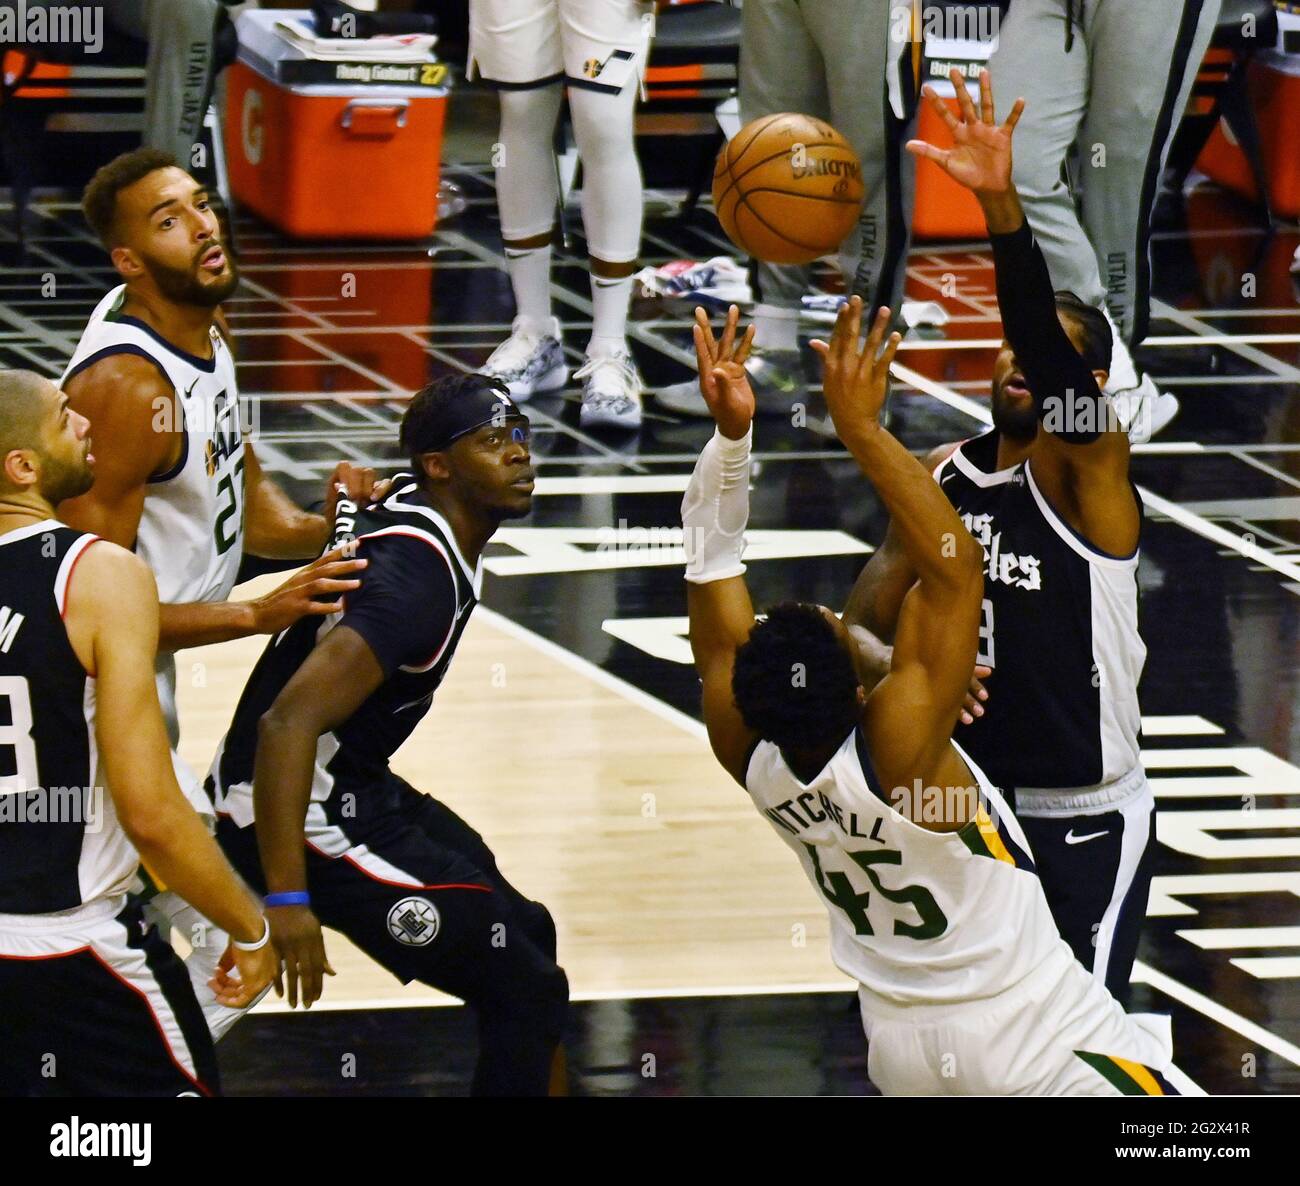 Los Angeles, Ca. 13th June, 2021. Utah Jazz guard Donovan Mitchell (45) loses control of the ball under pressure from Los Angeles Clippers guard Paul George (13) during the second half of Game 3 of the Western Conference second-round playoffs at Staples Center in Los Angeles on Saturday, June 12, 2021. The Clippers rallied to win another game 3, a 132-106 win over the Utah Jazz that cuts their deficit in this second-round series to 2-1 entering Monday's fourth game. Photo by Jim Ruymen/UPI Credit: UPI/Alamy Live News Stock Photo